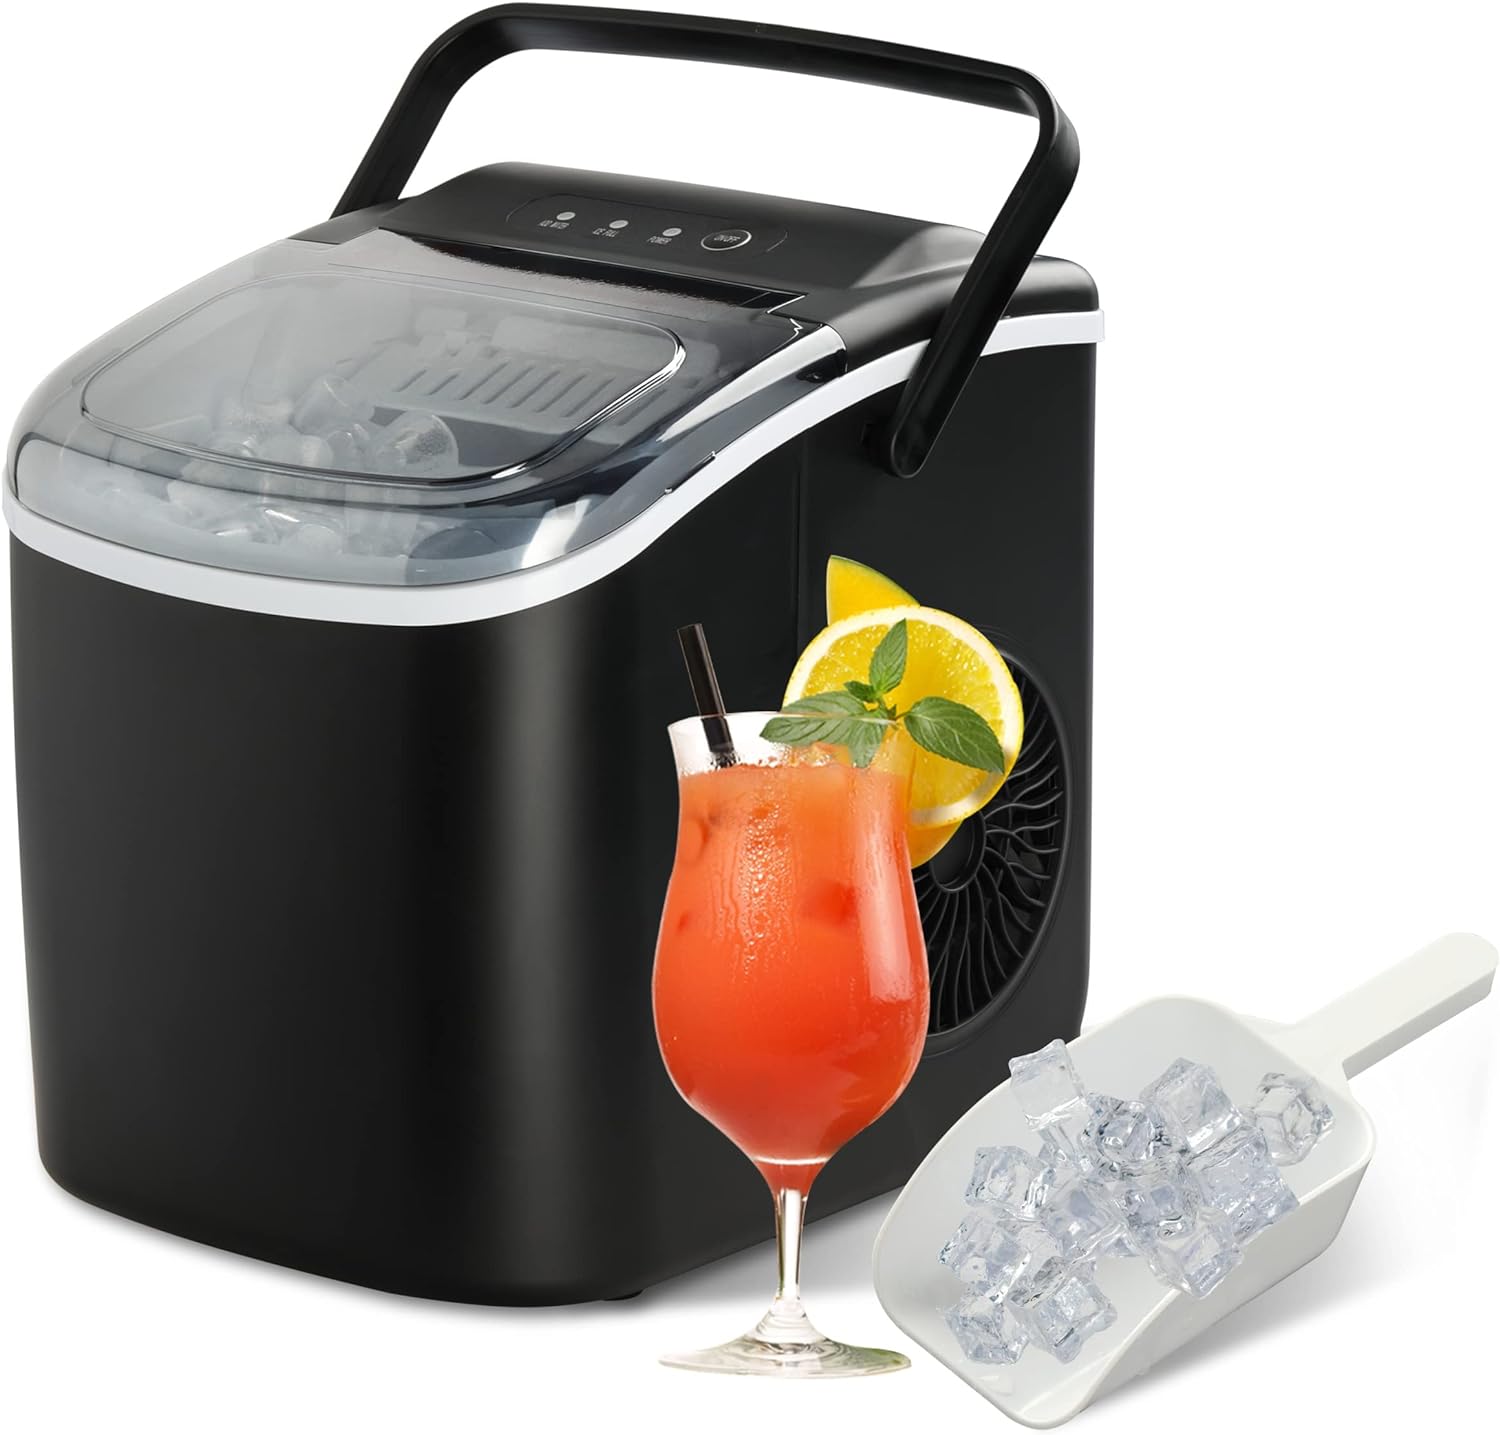 YSSOA Portable Ice Maker for Countertop, 6 Mins 9 Ice Cubes, 26lbs Ice/24H, Self-Cleaning, with Ice Spoon and Basket, for Home/Kitchen/Office/Camping/Party, Black